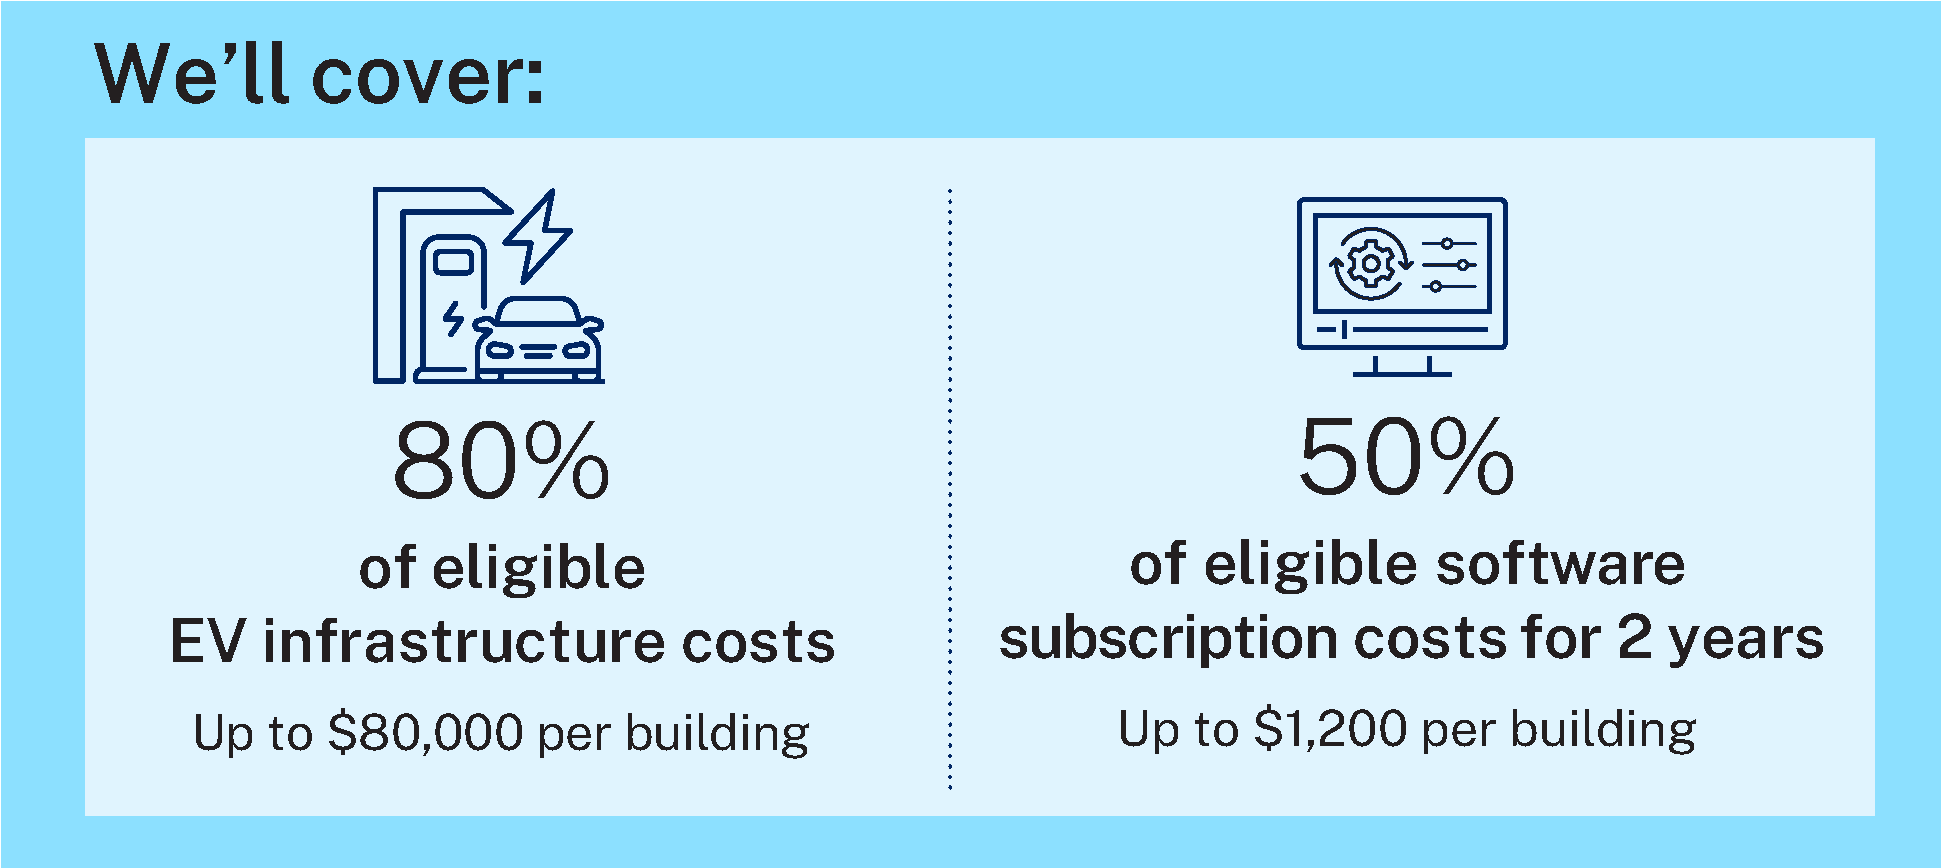 Infographic with text that says "We'll cover 80% of eligible of EV infrastructure costs, up to $80,000 per building; and 50% of eligible software subscription costs for 2 years, up to $1,200 per building"